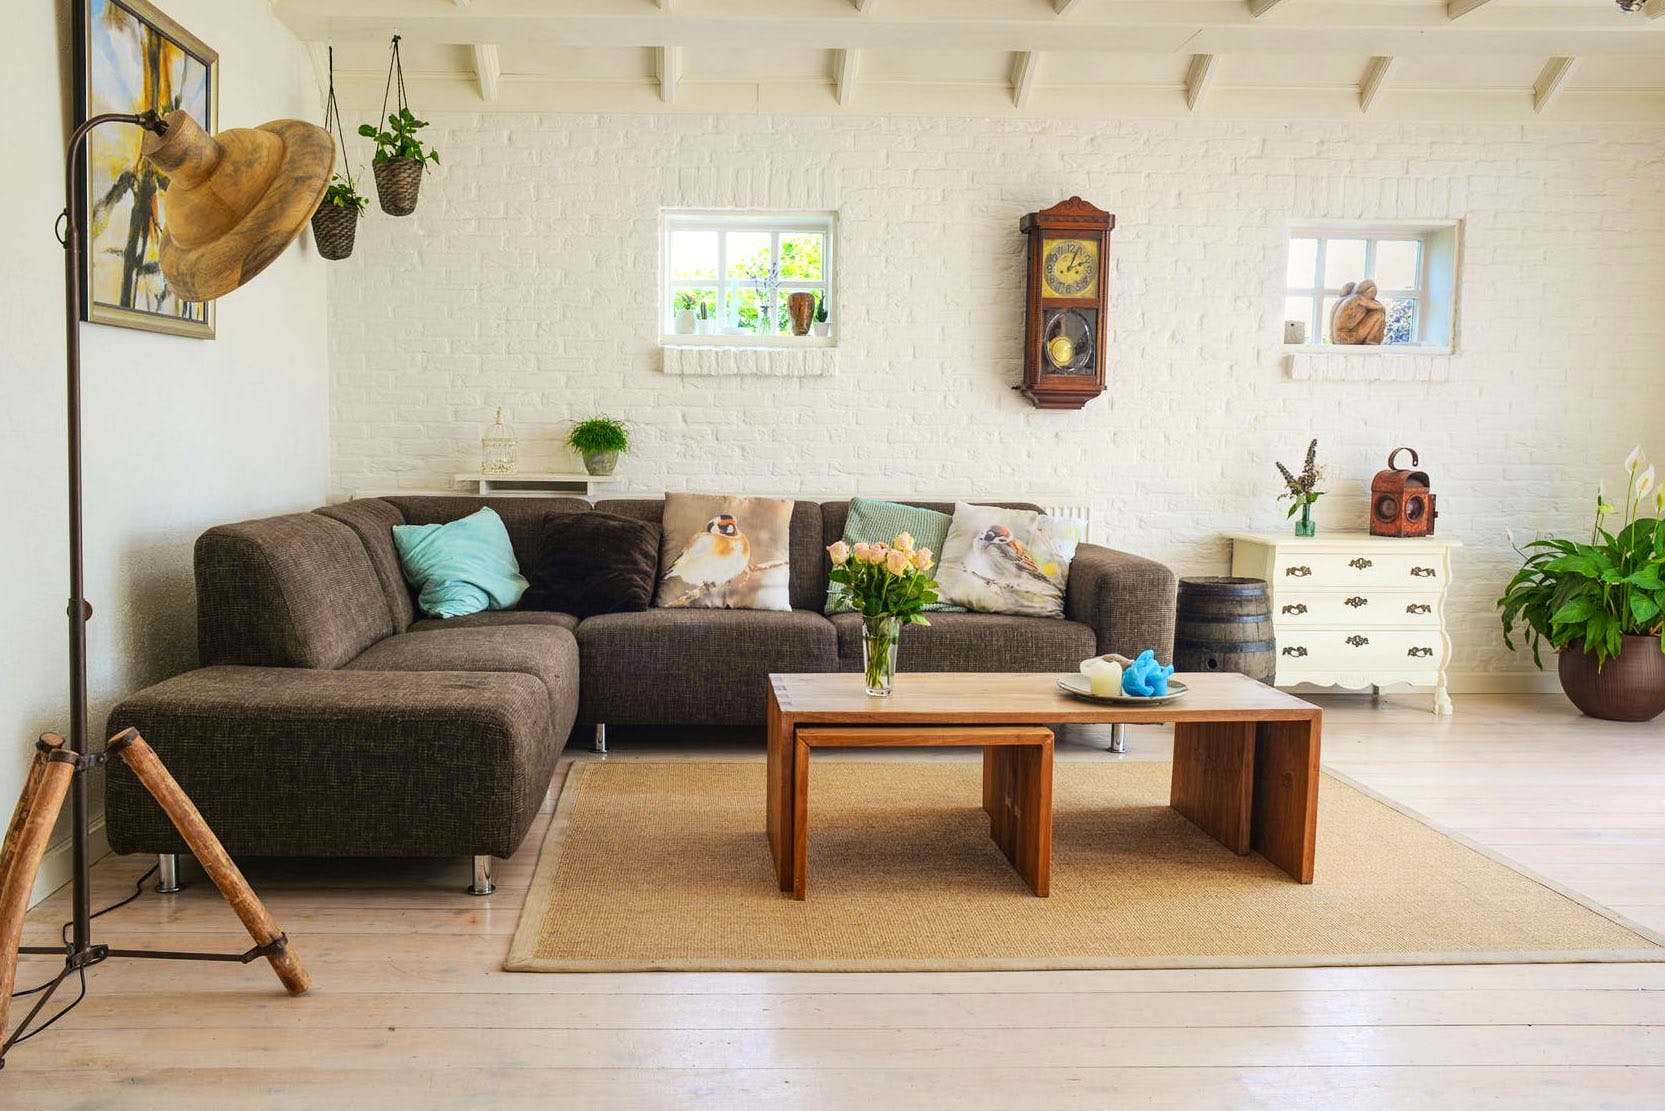 Living room,Room,Interior design,Furniture,Floor,Green,Property,Table,Coffee table,Wall